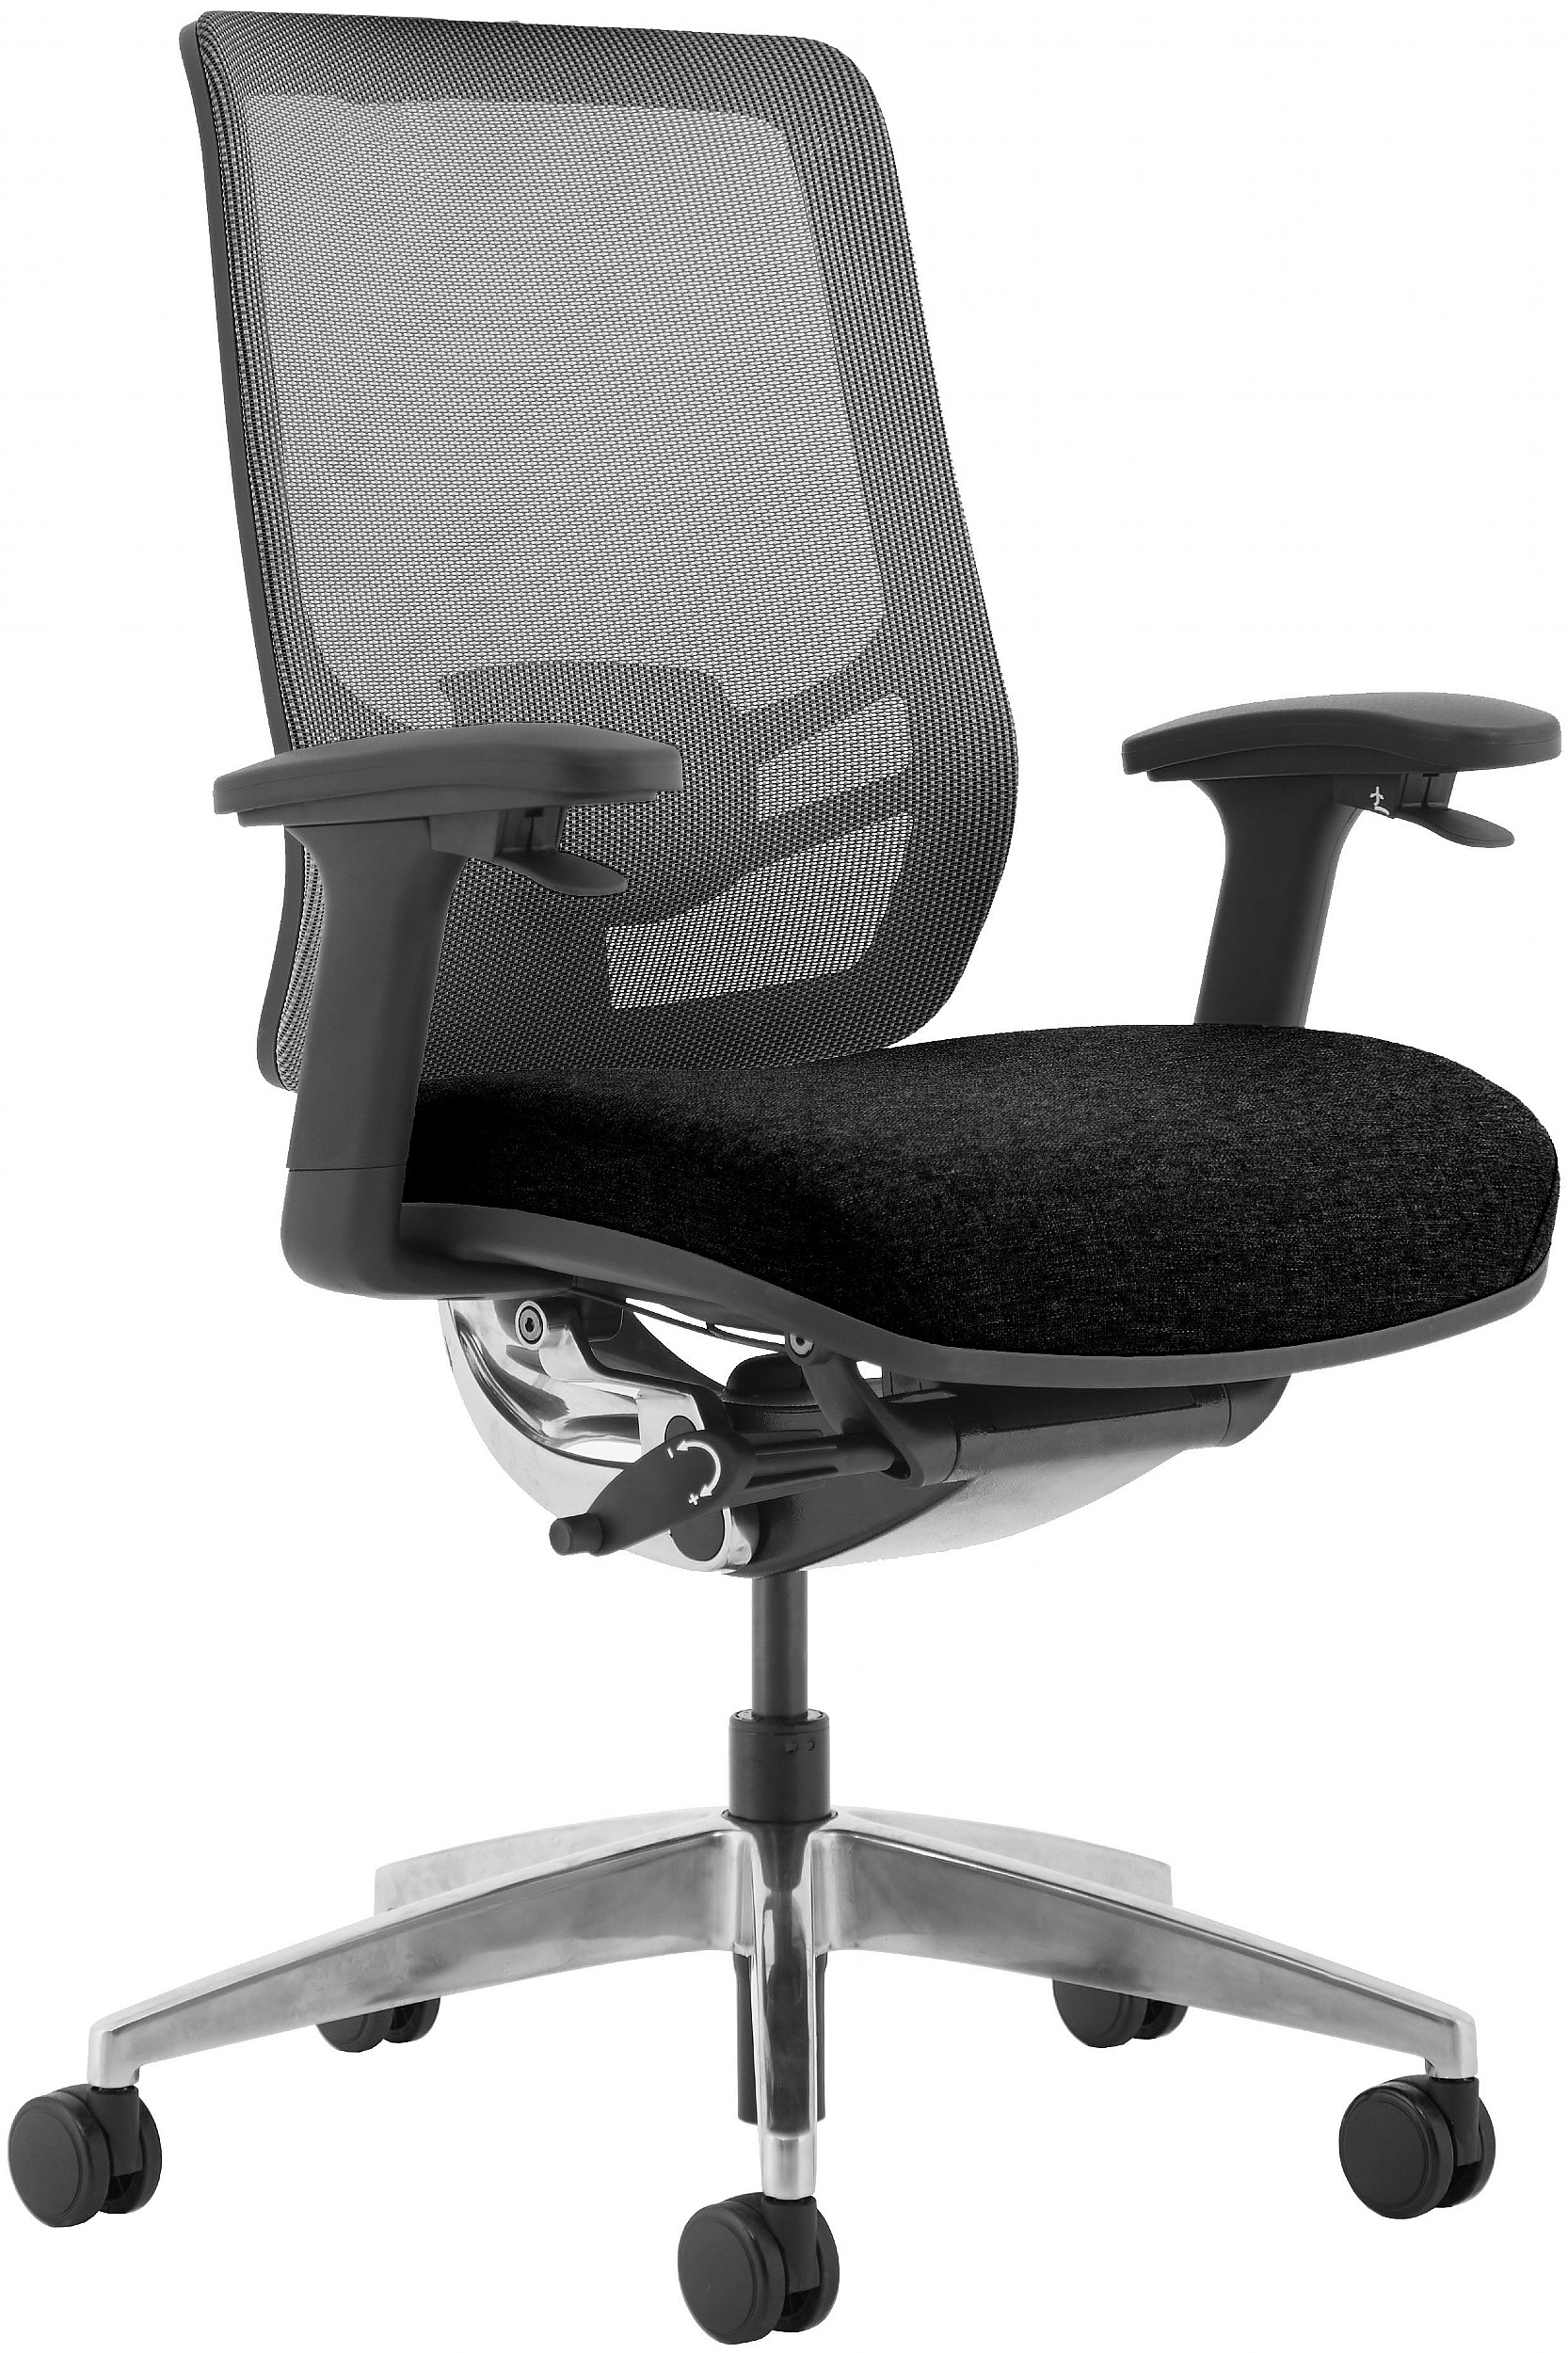 Ergo Posture 24 Hour Fabric And Mesh Office Chair Posture Ergonomic Office Chairs